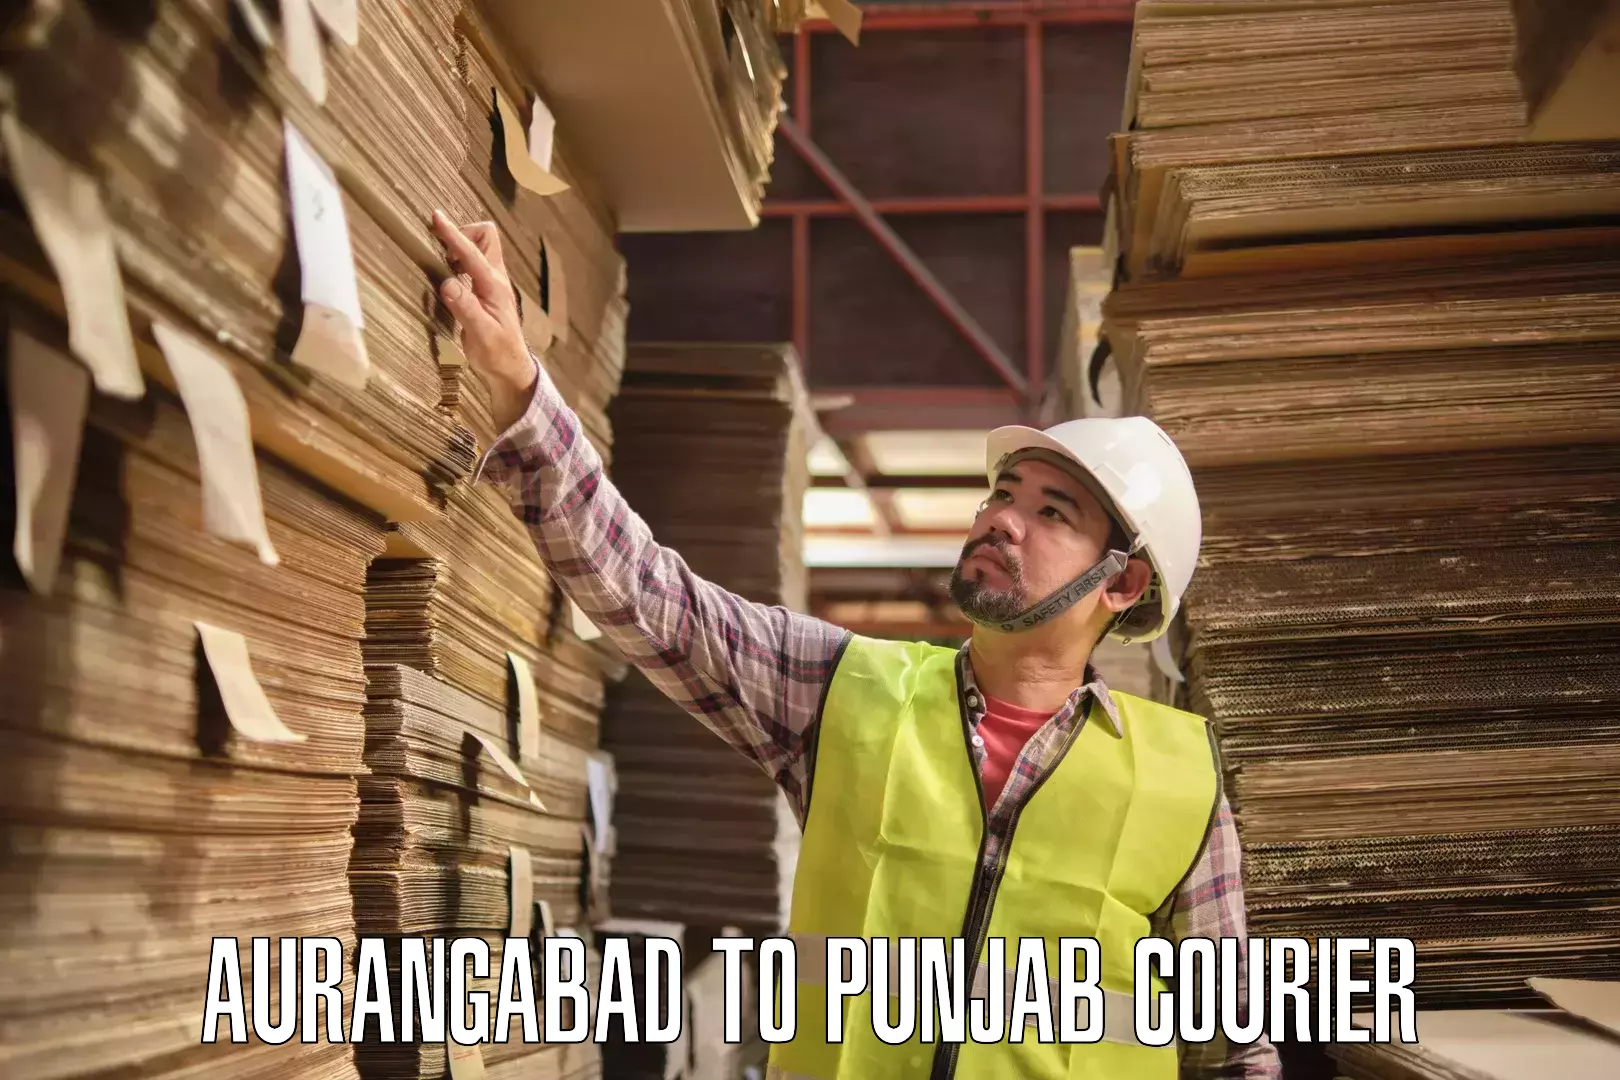 State-of-the-art courier technology Aurangabad to Mohali